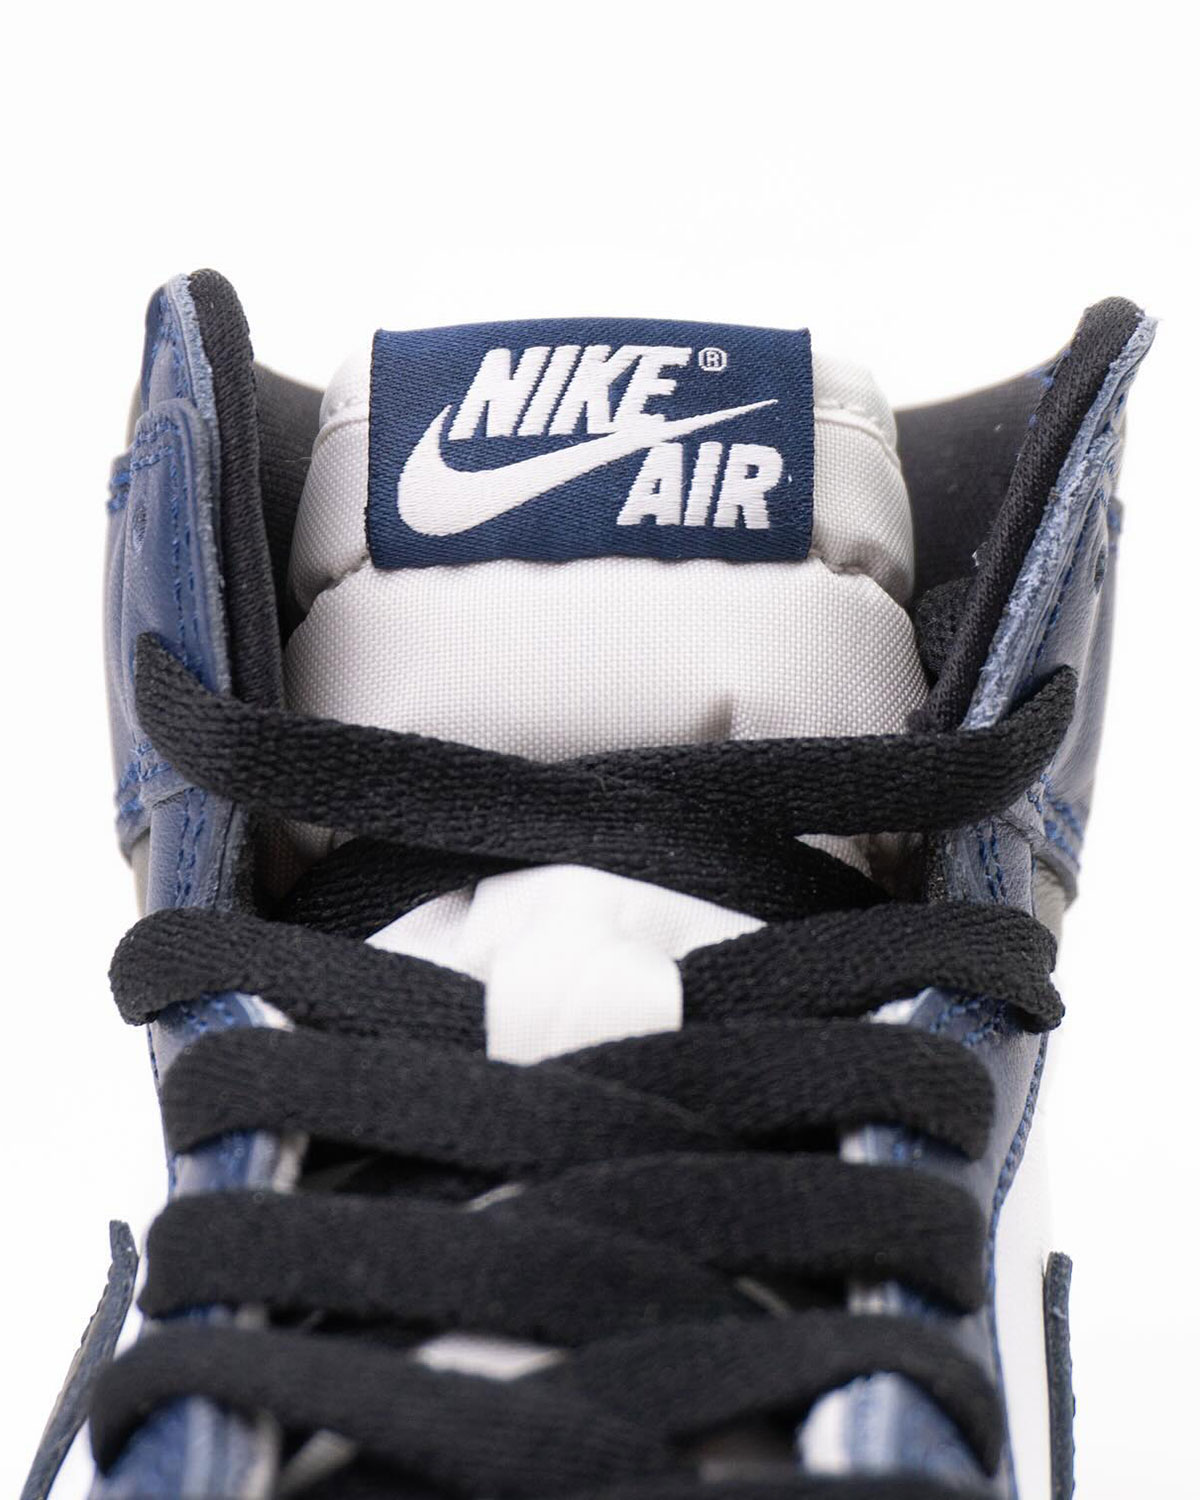 Do you really know the history of the Air Jordan Selection 1 Retro High Og Midnight Navy Dz5485 401 2